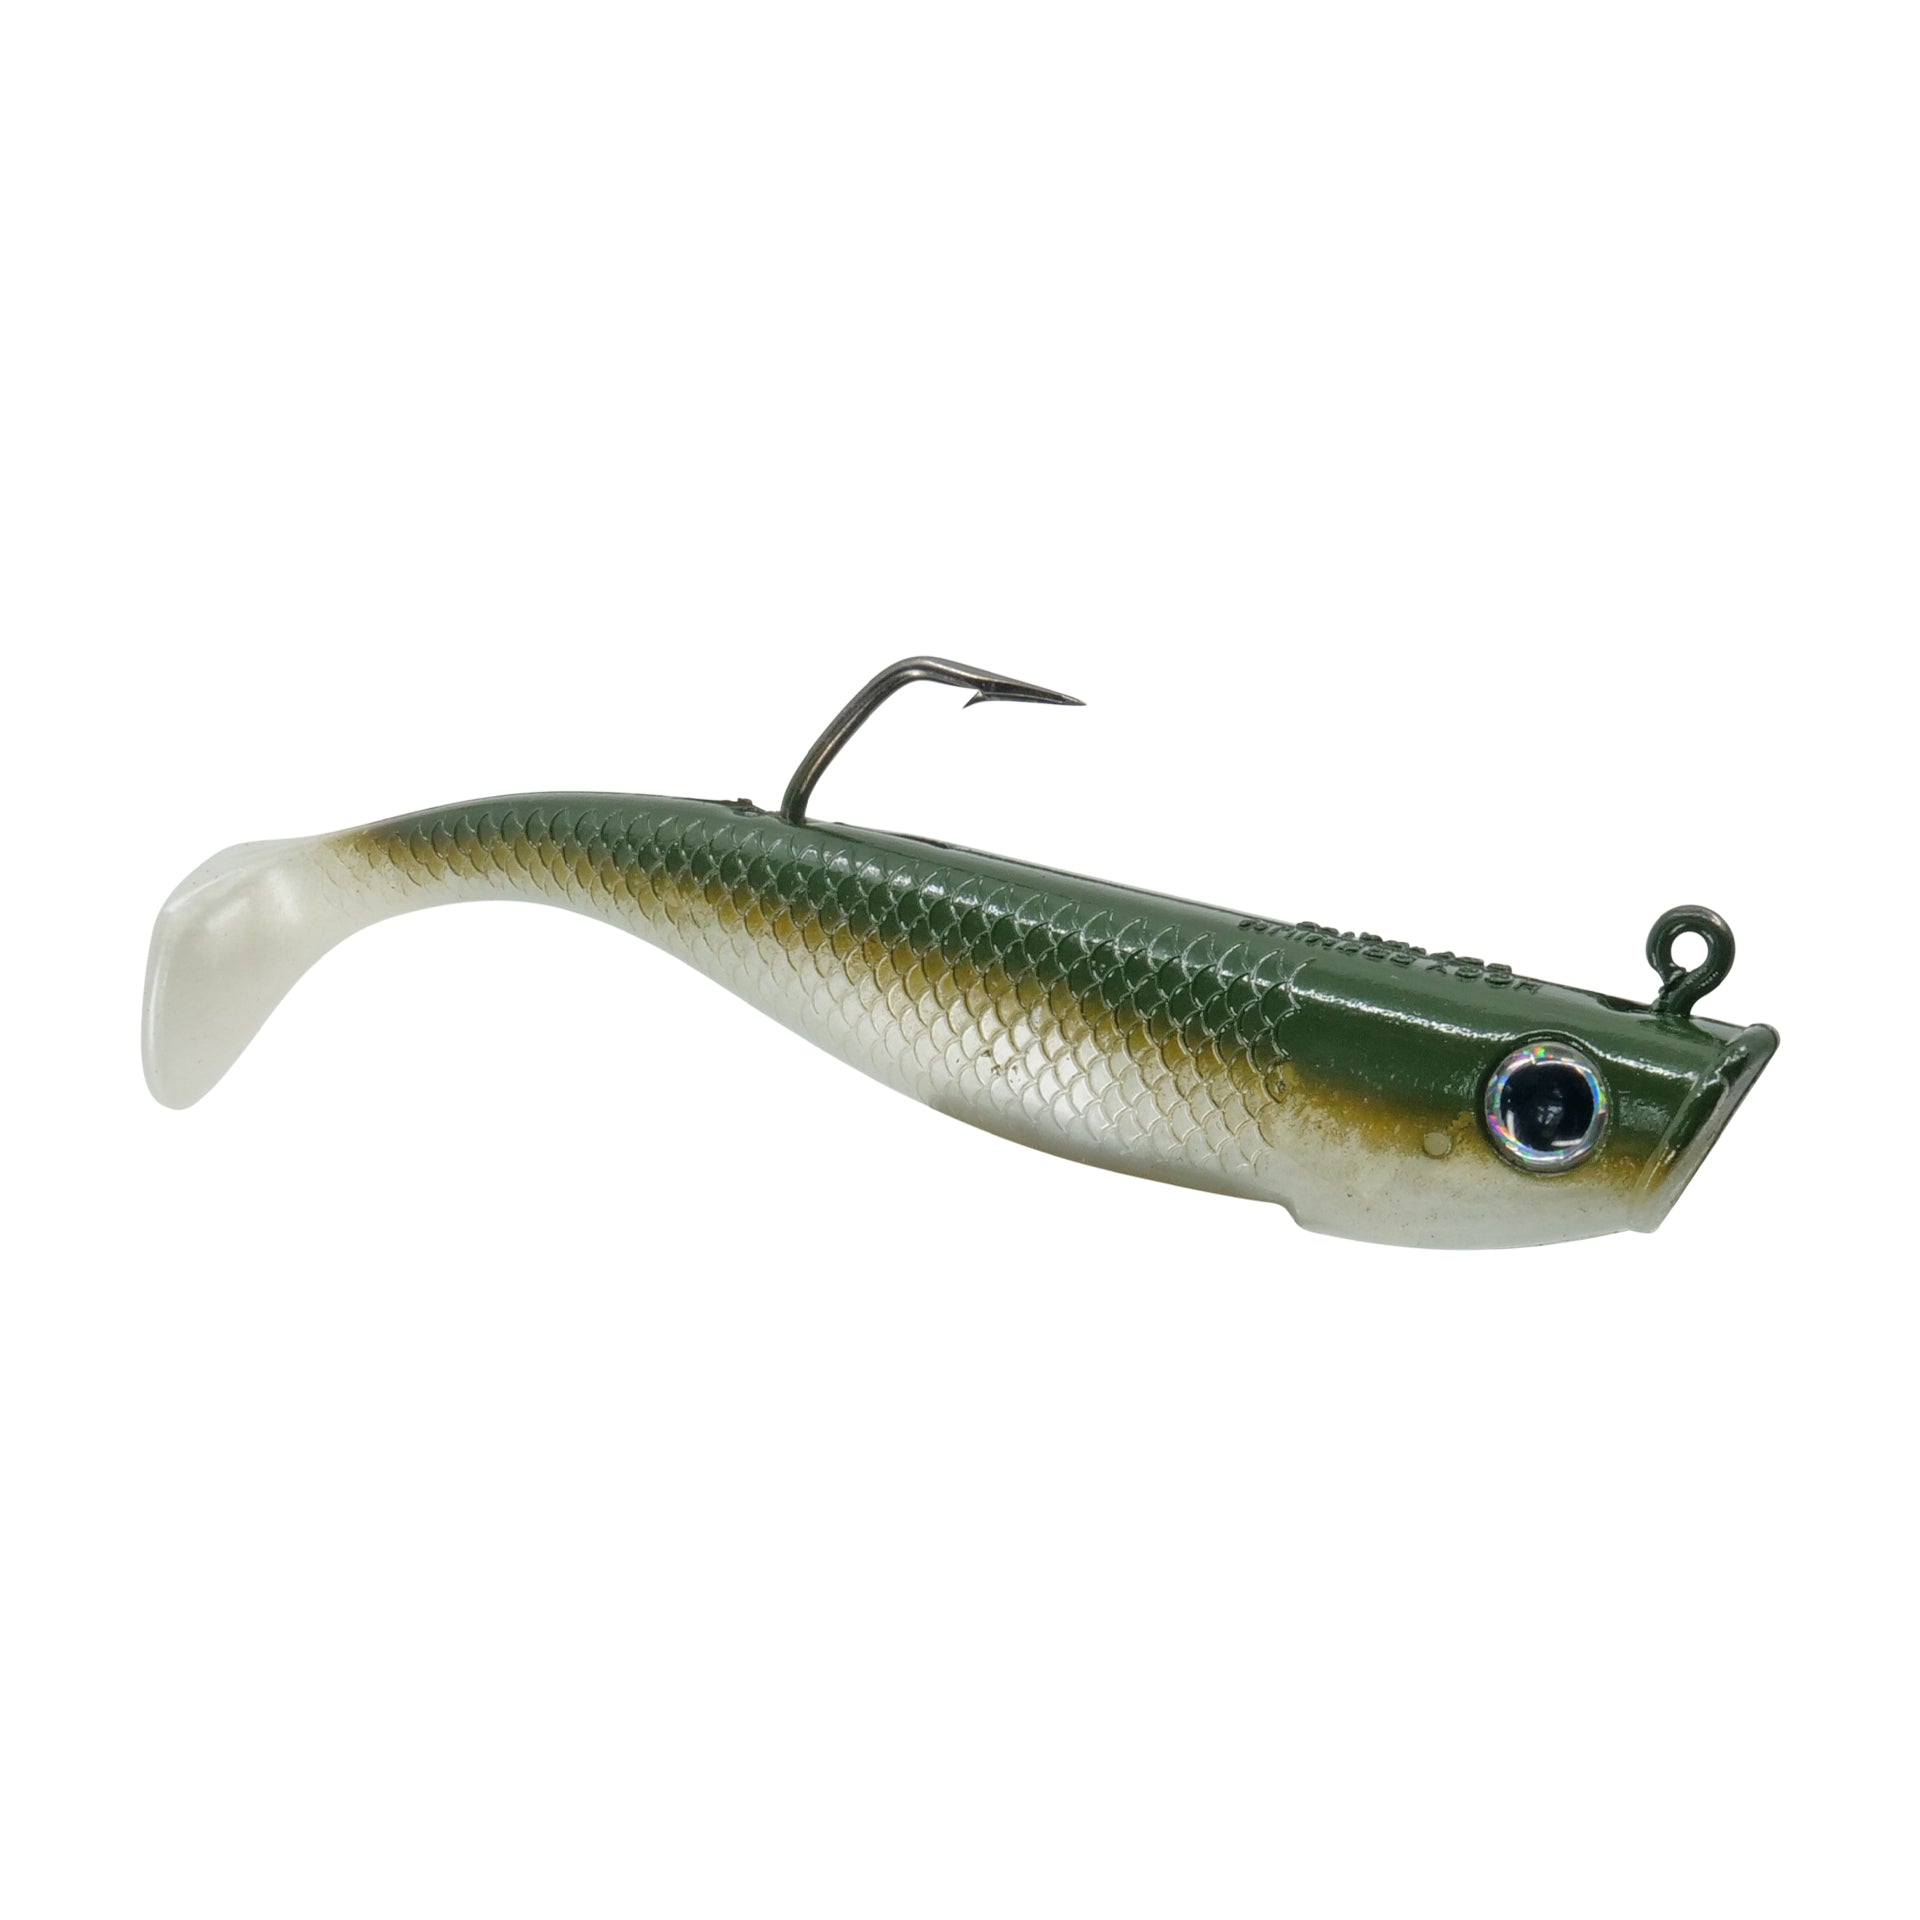 Buy Lure Boy Products Online in Harare at Best Prices on